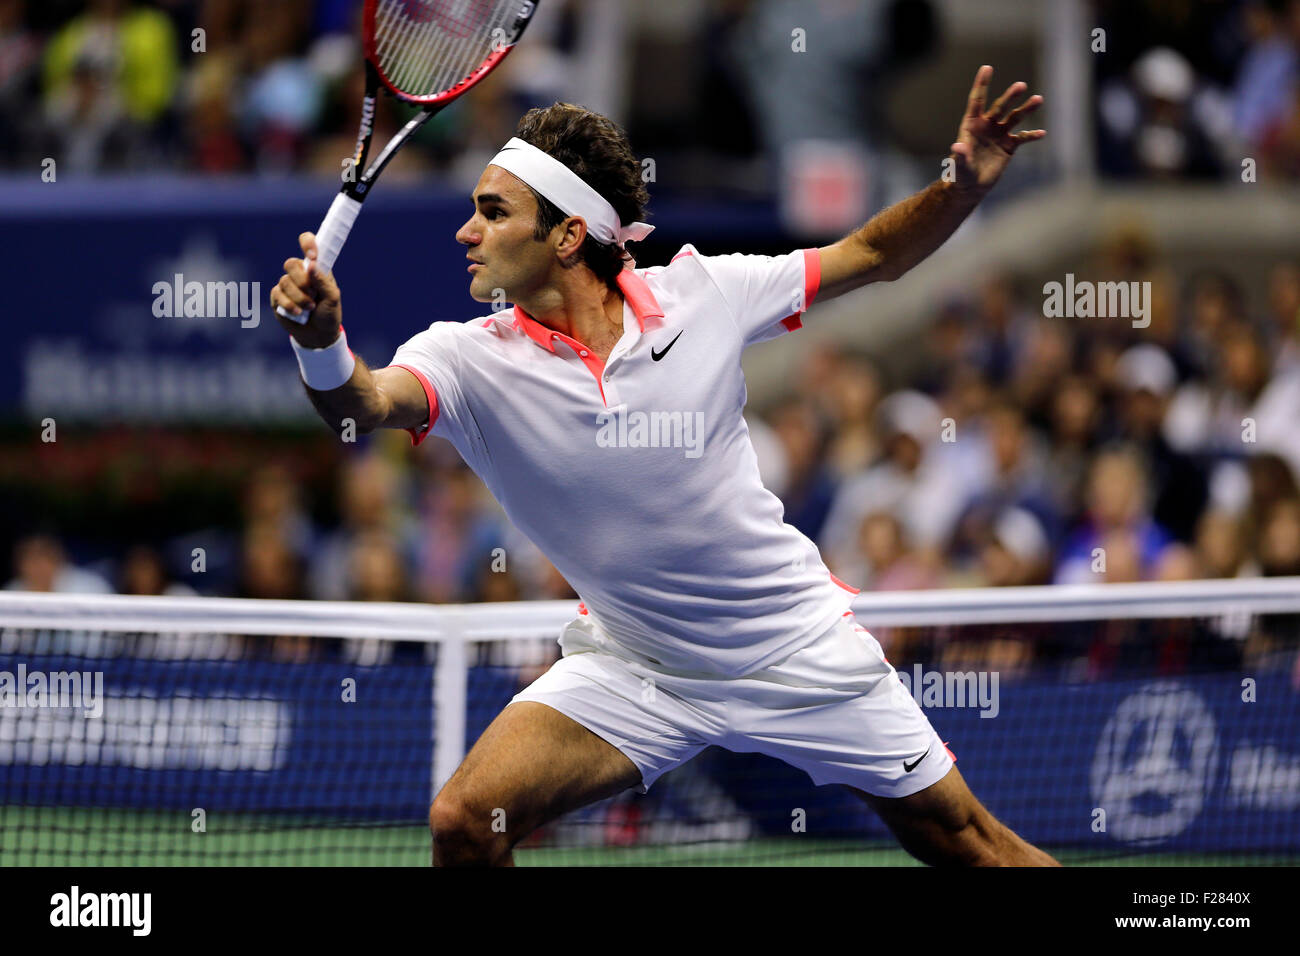 New York, USA. 13th Sep, 2015. Roger Federer lunges for a volley against Novak Djokovic of Serbia in the final of the U.S. Open. Djokovic defeated Federer 6-4, 5-7, 6-4, 6-4 to win his second U.S Open title at Flushing Meadows, New York on September 13th, 2015. Credit:  Adam Stoltman/Alamy Live News Stock Photo